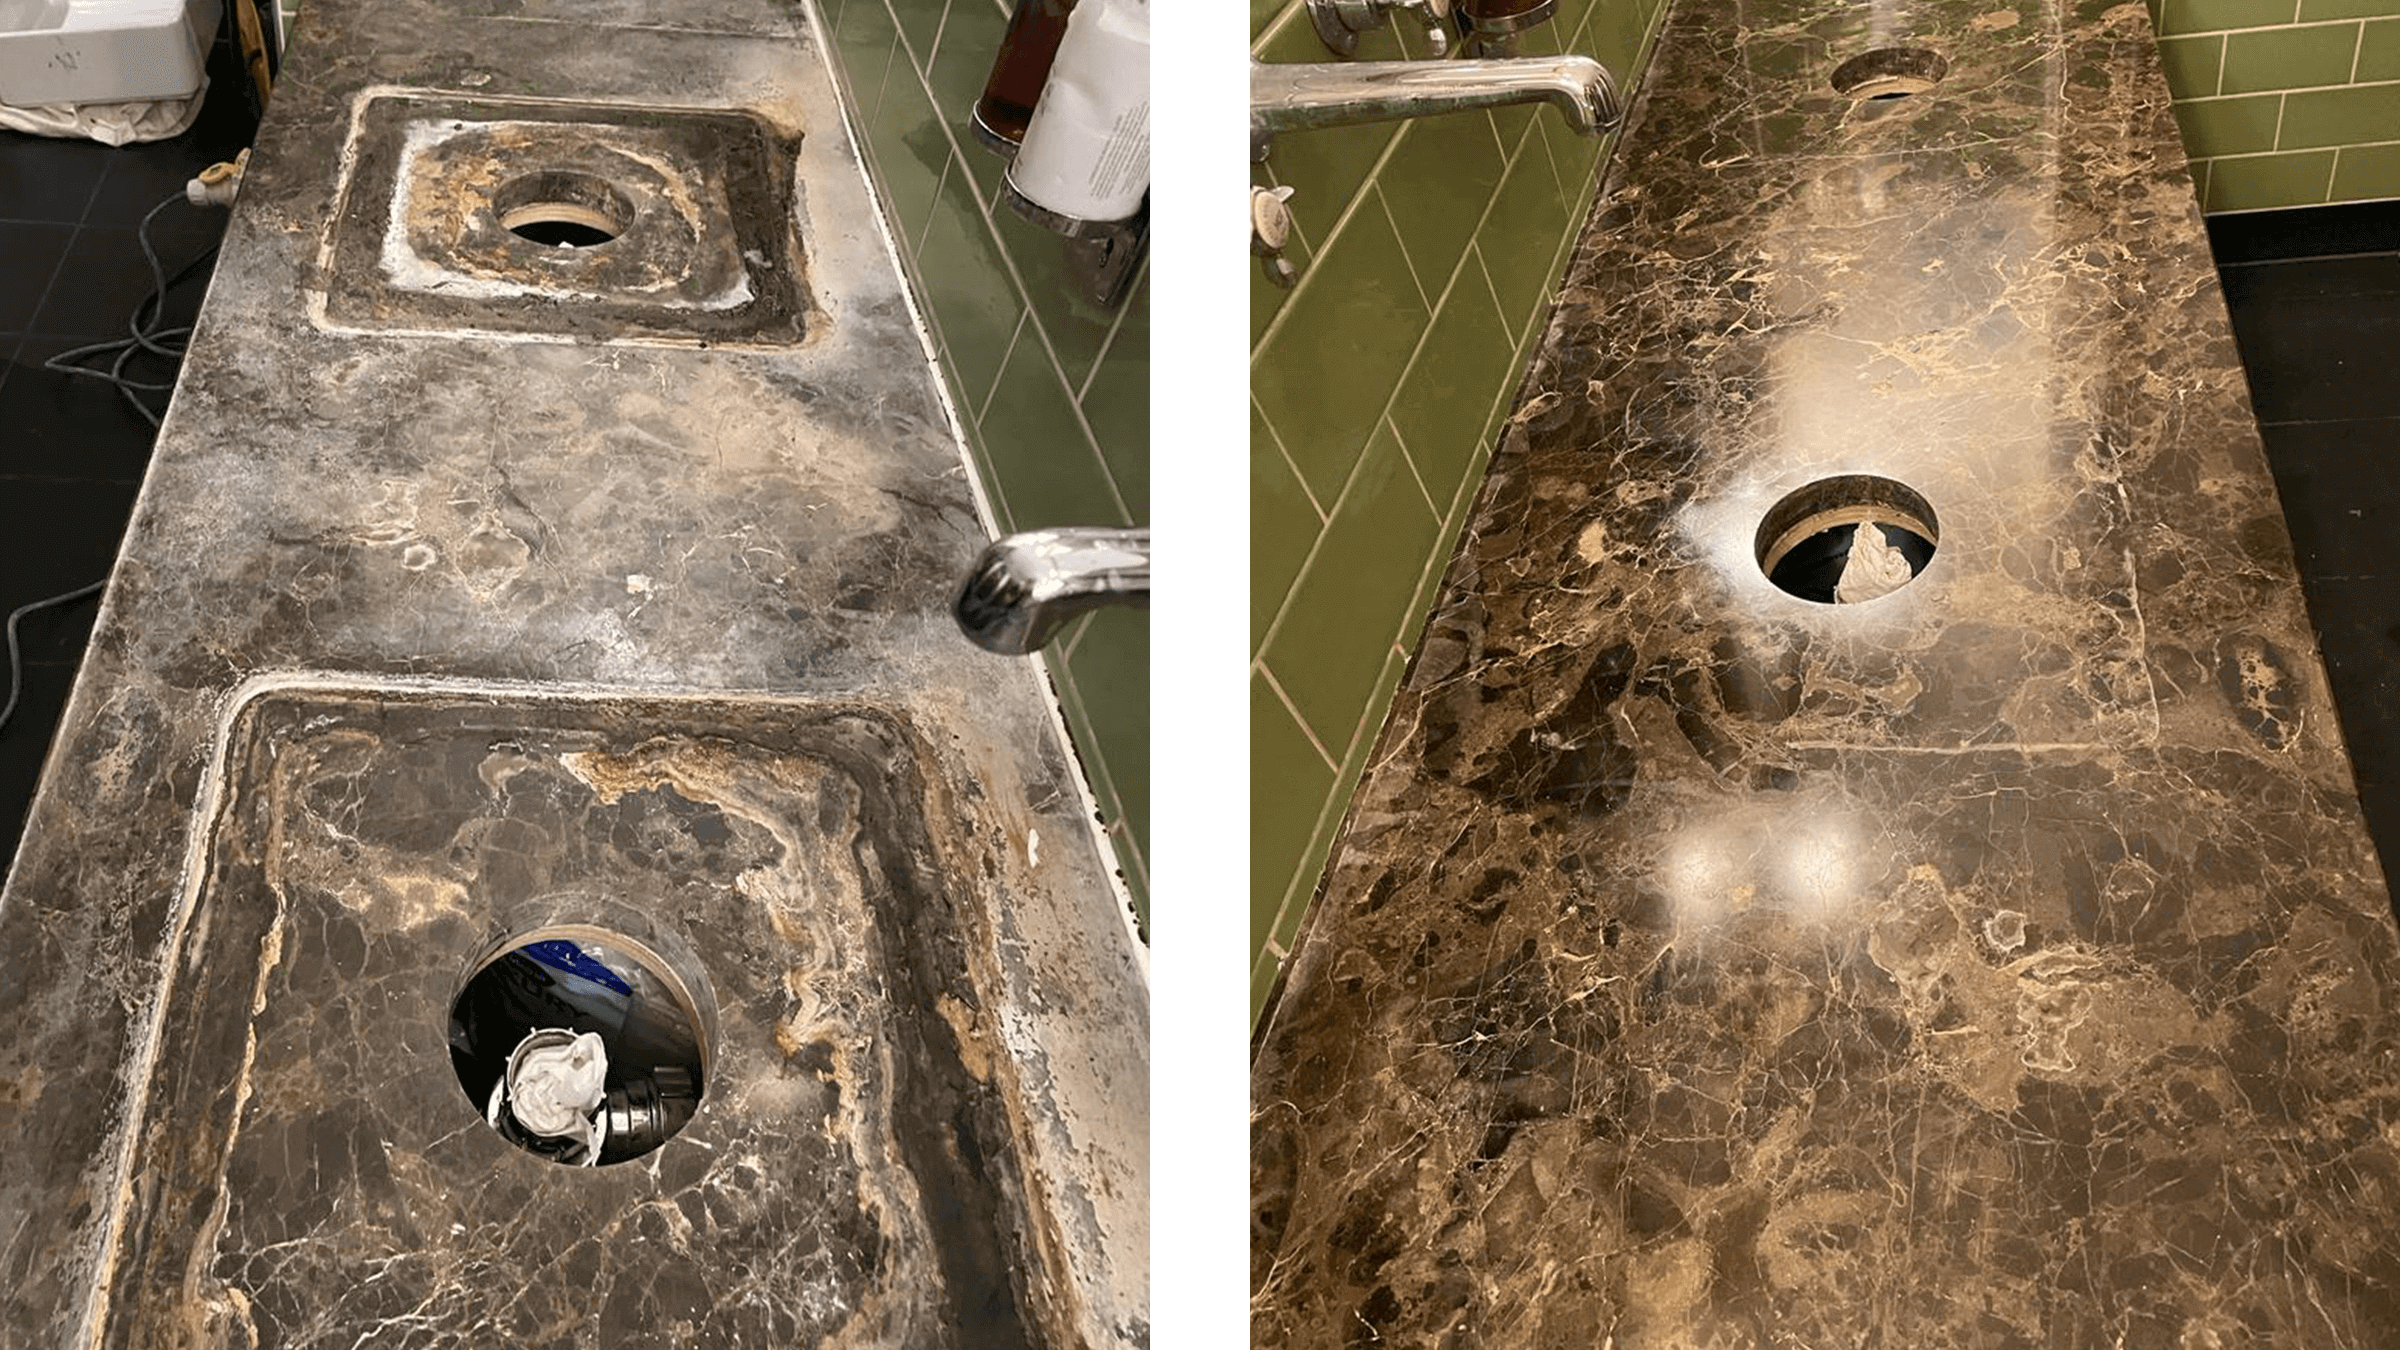 Removal of excess limescale and restoration of vanity tops in restrooms